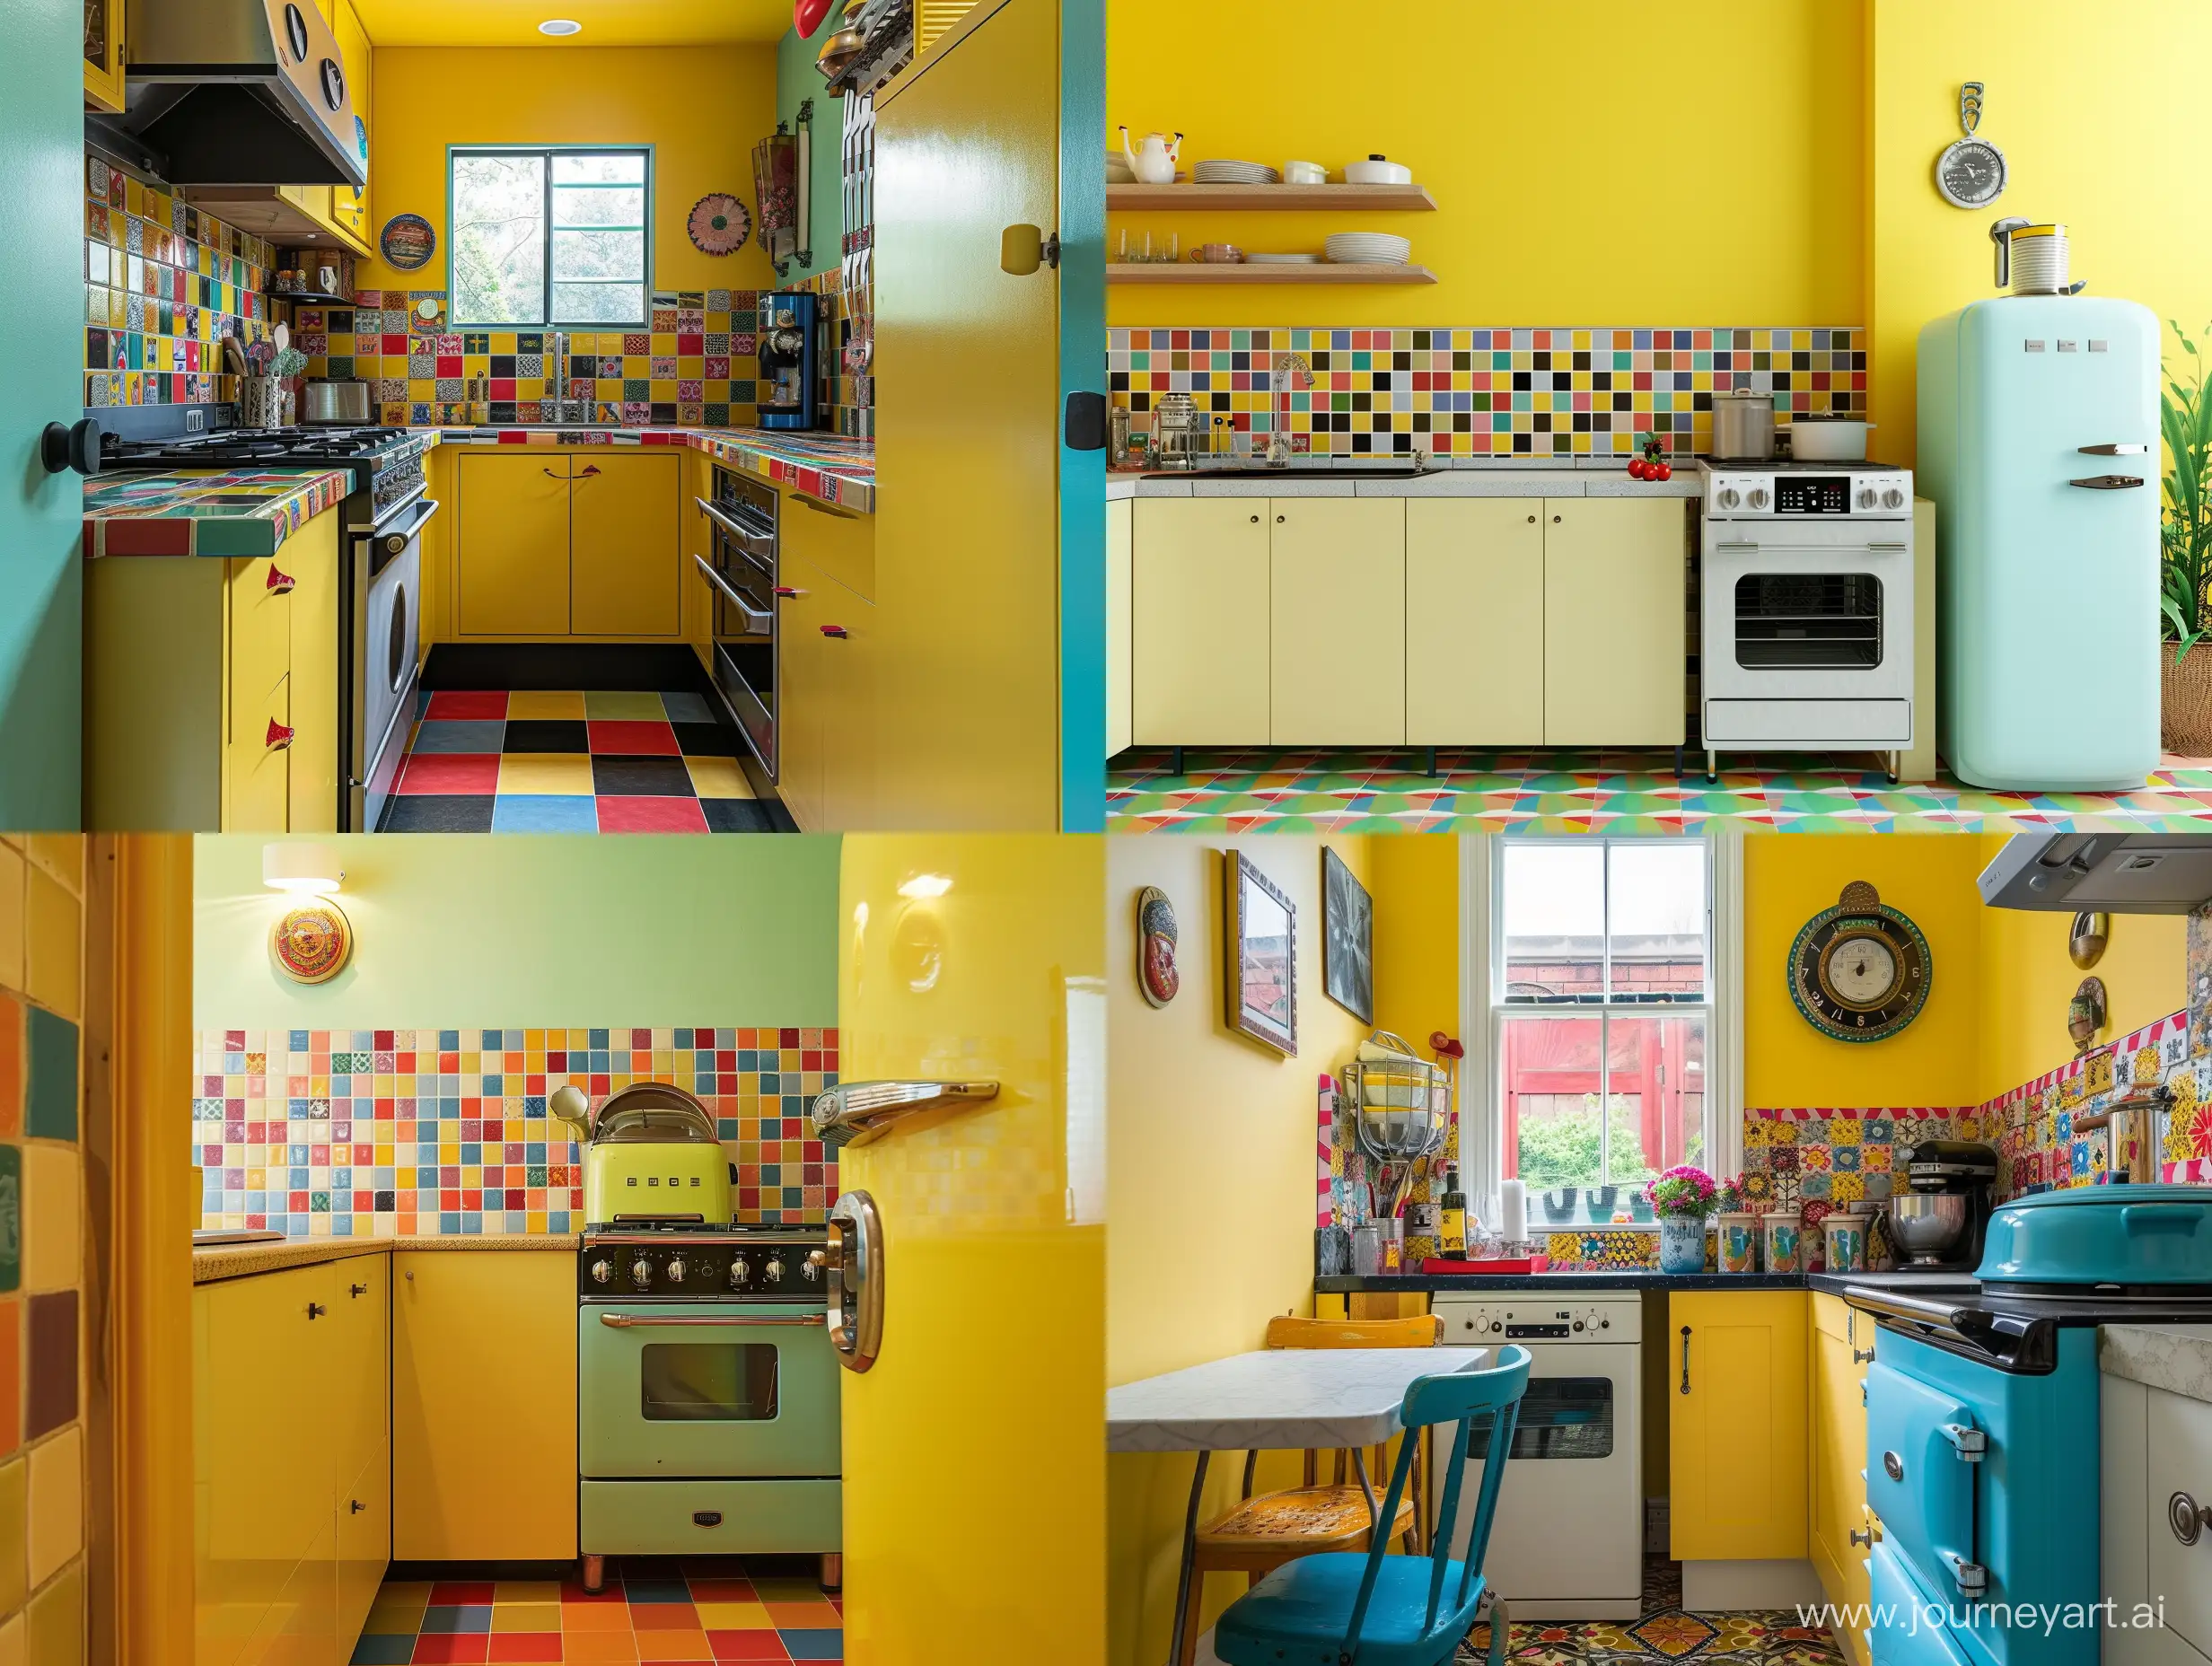 Vibrant-Retro-Kitchen-with-Colorful-Tiles-and-Vintage-Appliances